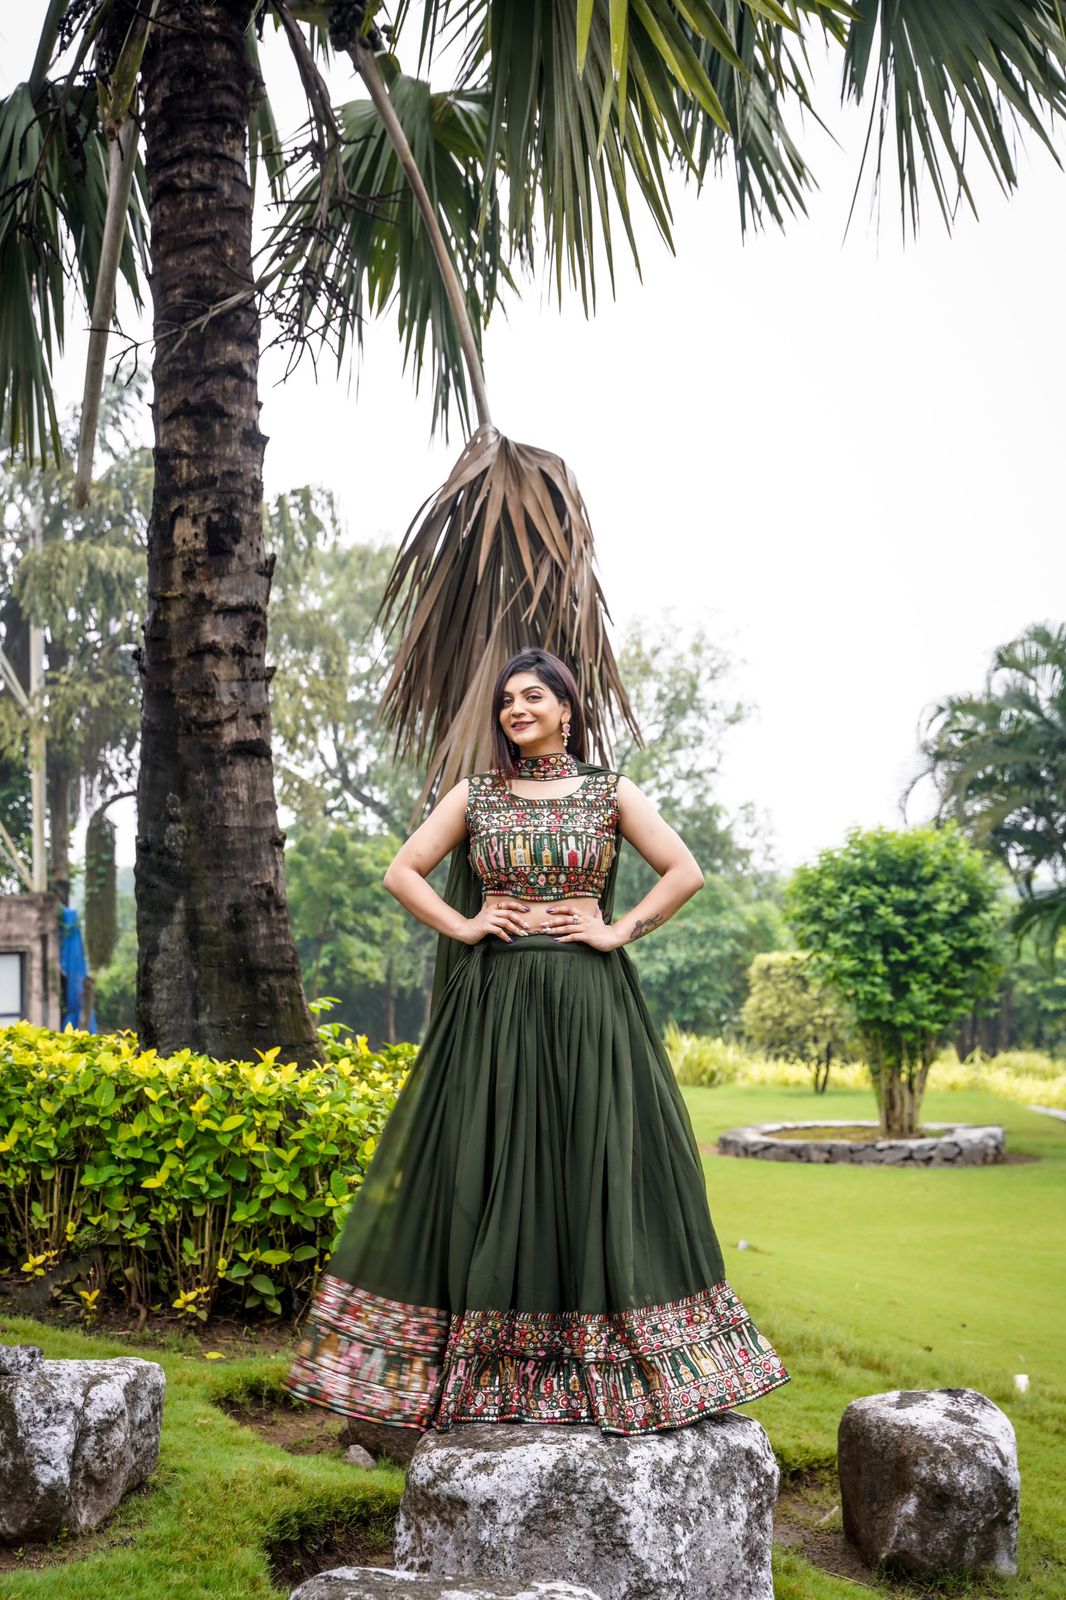 Looking for a Green Dress for Mehndi Function? Here's the best to select.